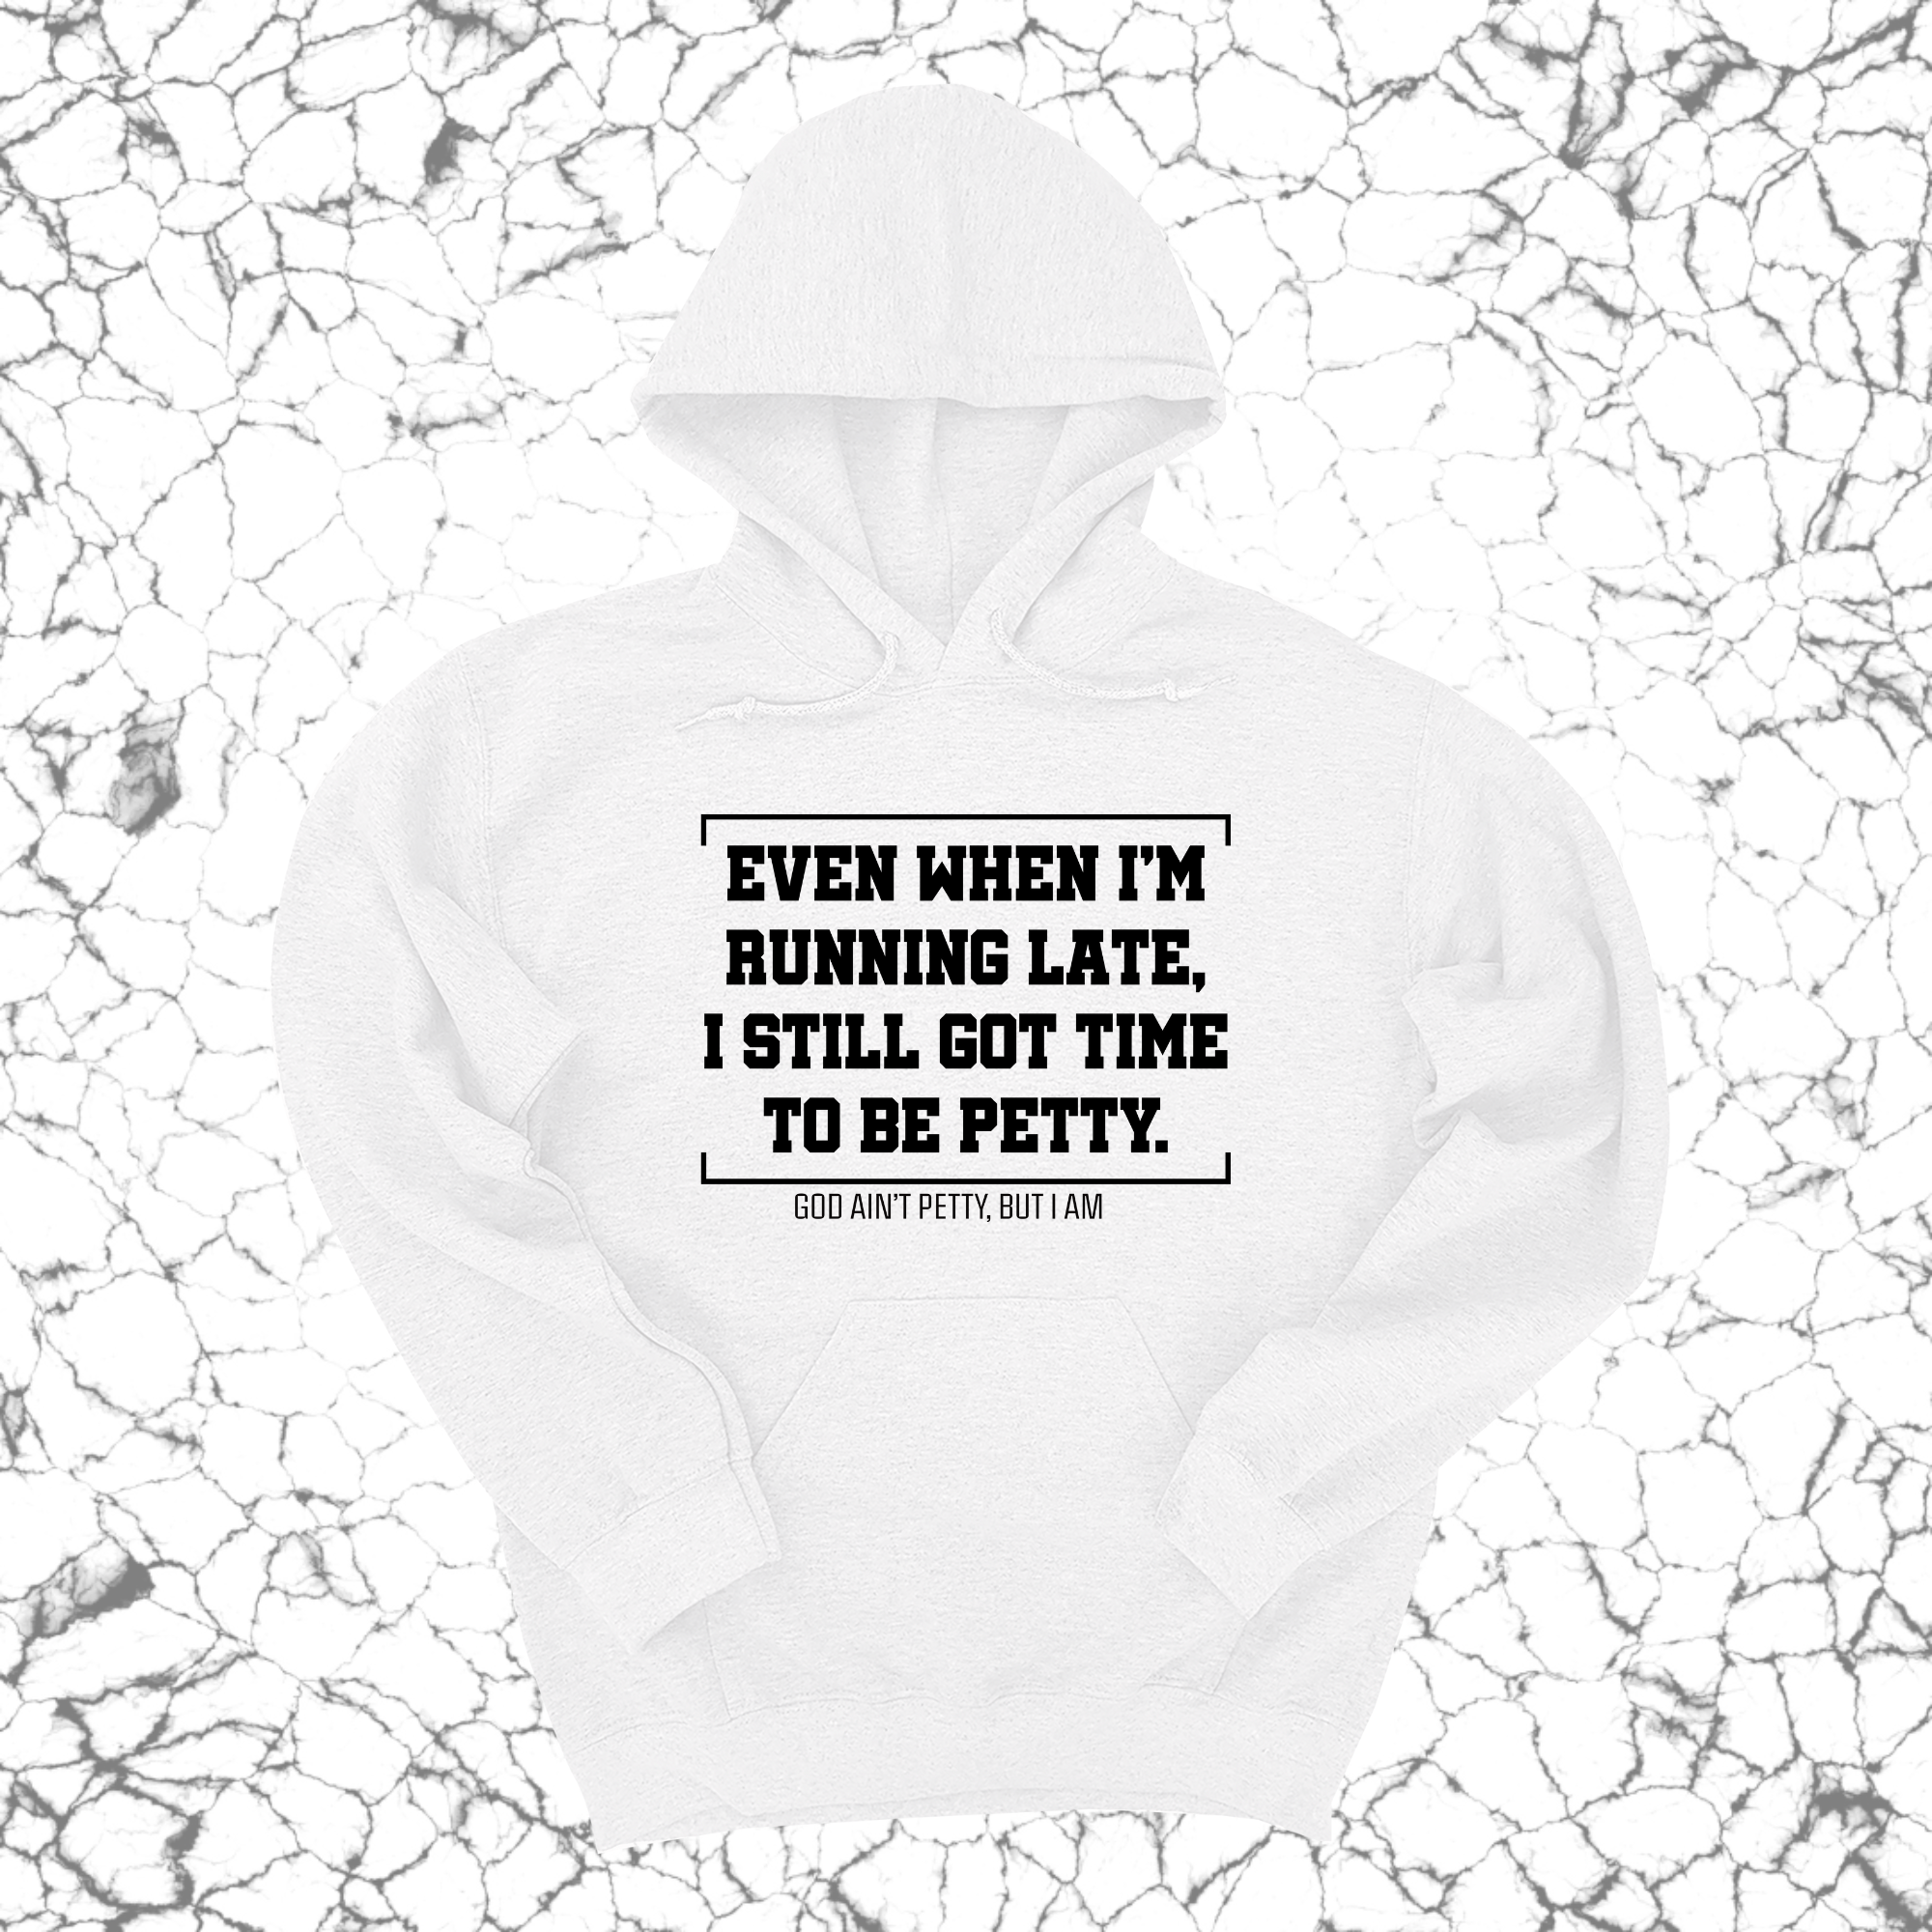 Even when I'm running late, I still got time to be petty Unisex Hoodie-Hoodie-The Original God Ain't Petty But I Am